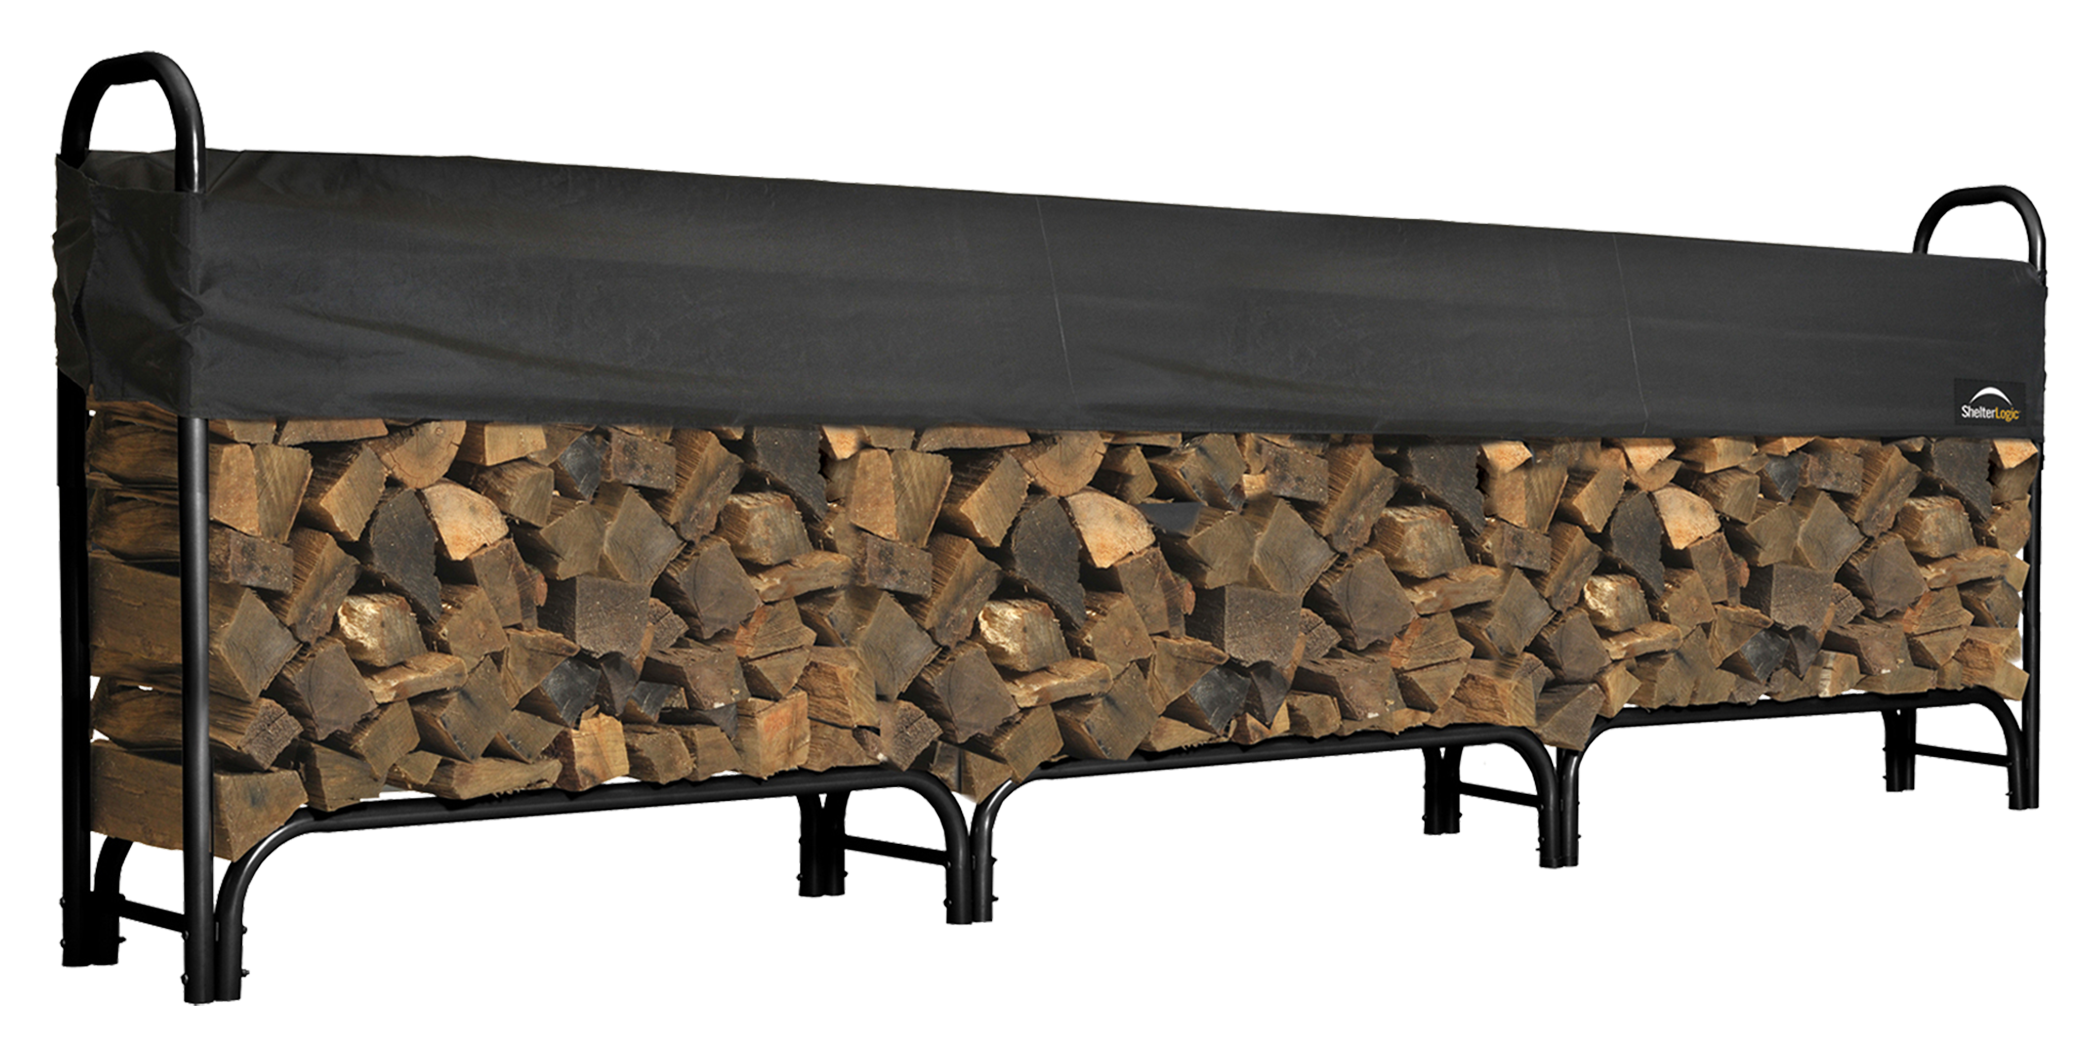 ShelterLogic Heavy-Duty Firewood Rack with Cover